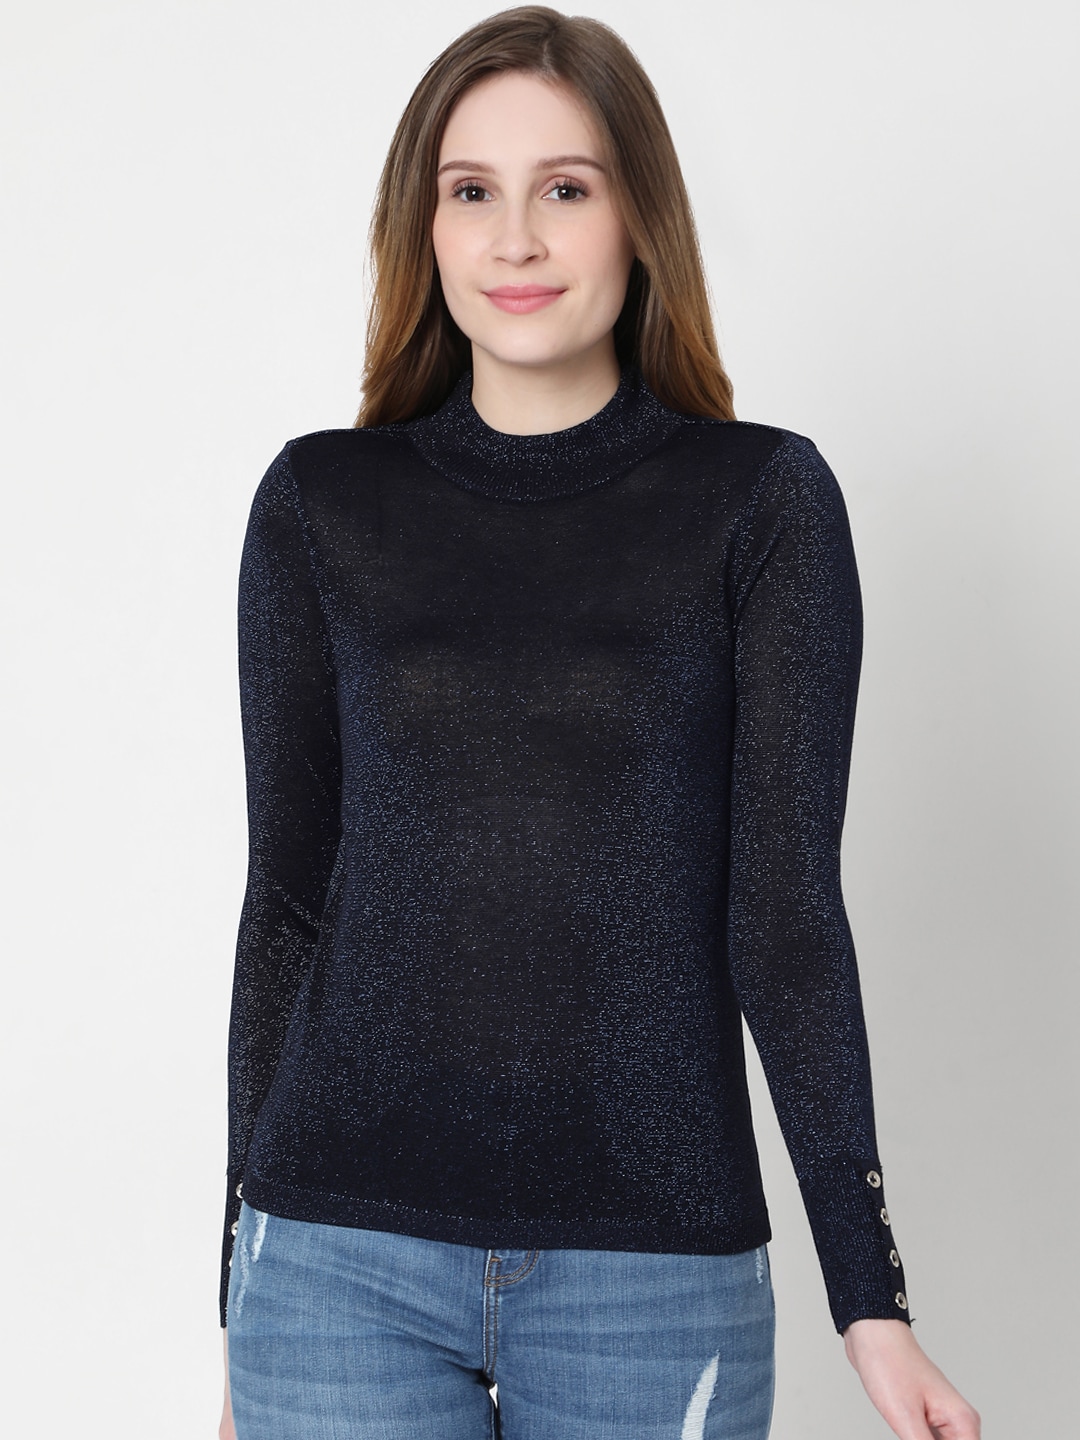 Vero Moda Women Navy Blue Shimmer Effect Pullover Sweater Price in India